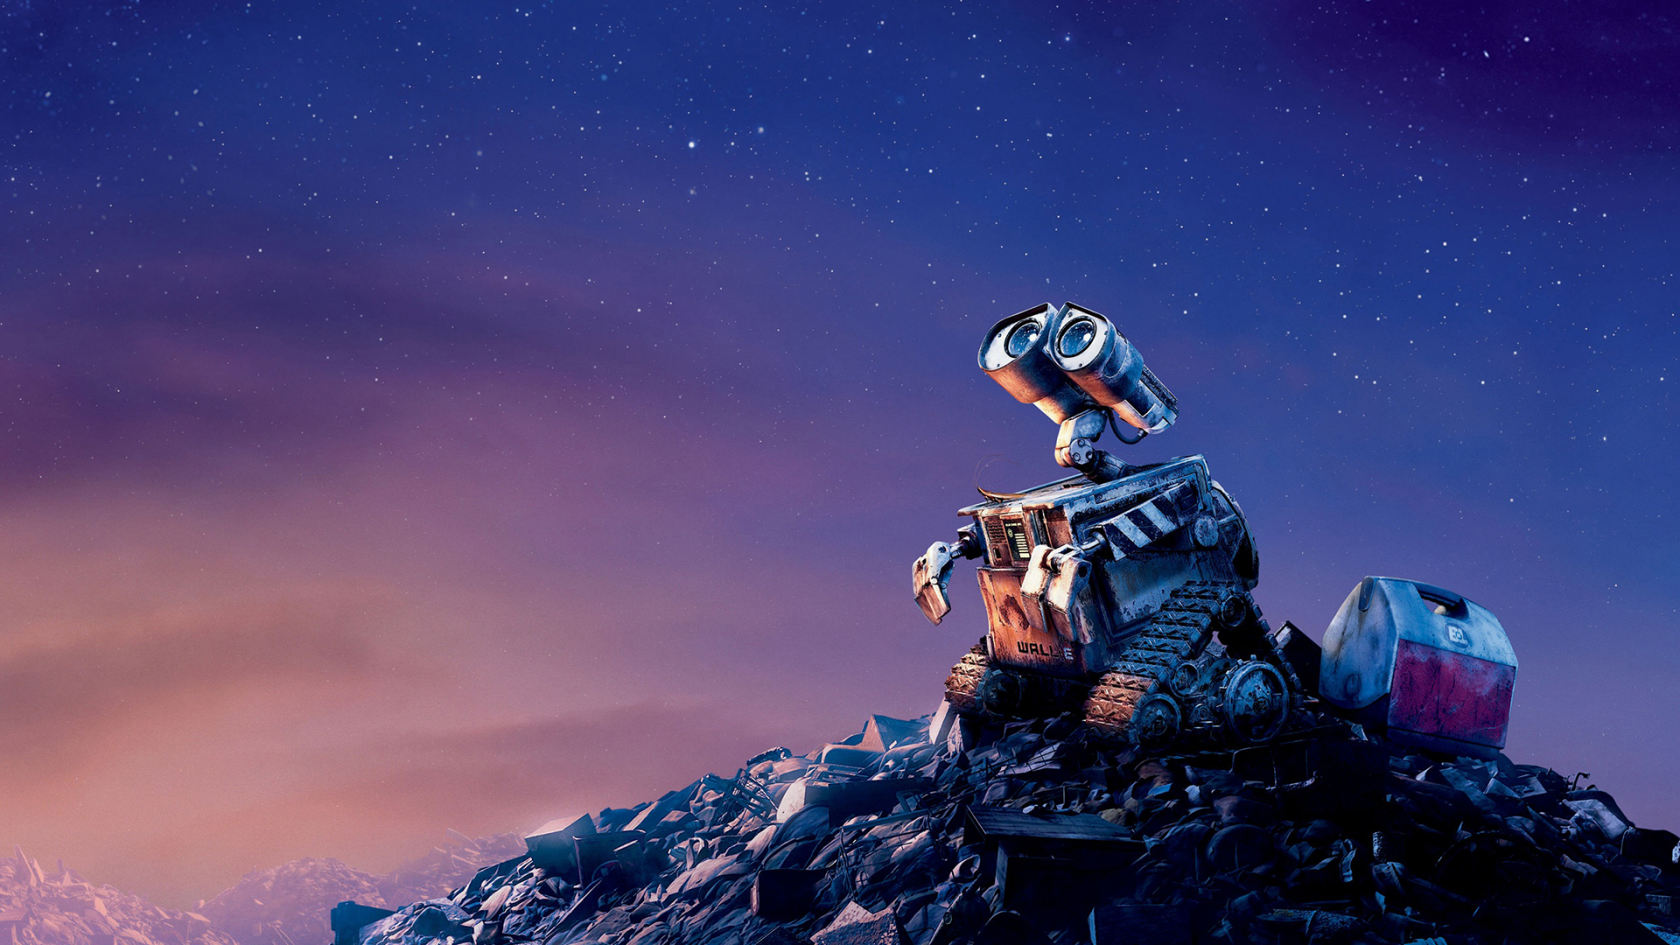 Wall-E for 1680 x 945 HDTV resolution